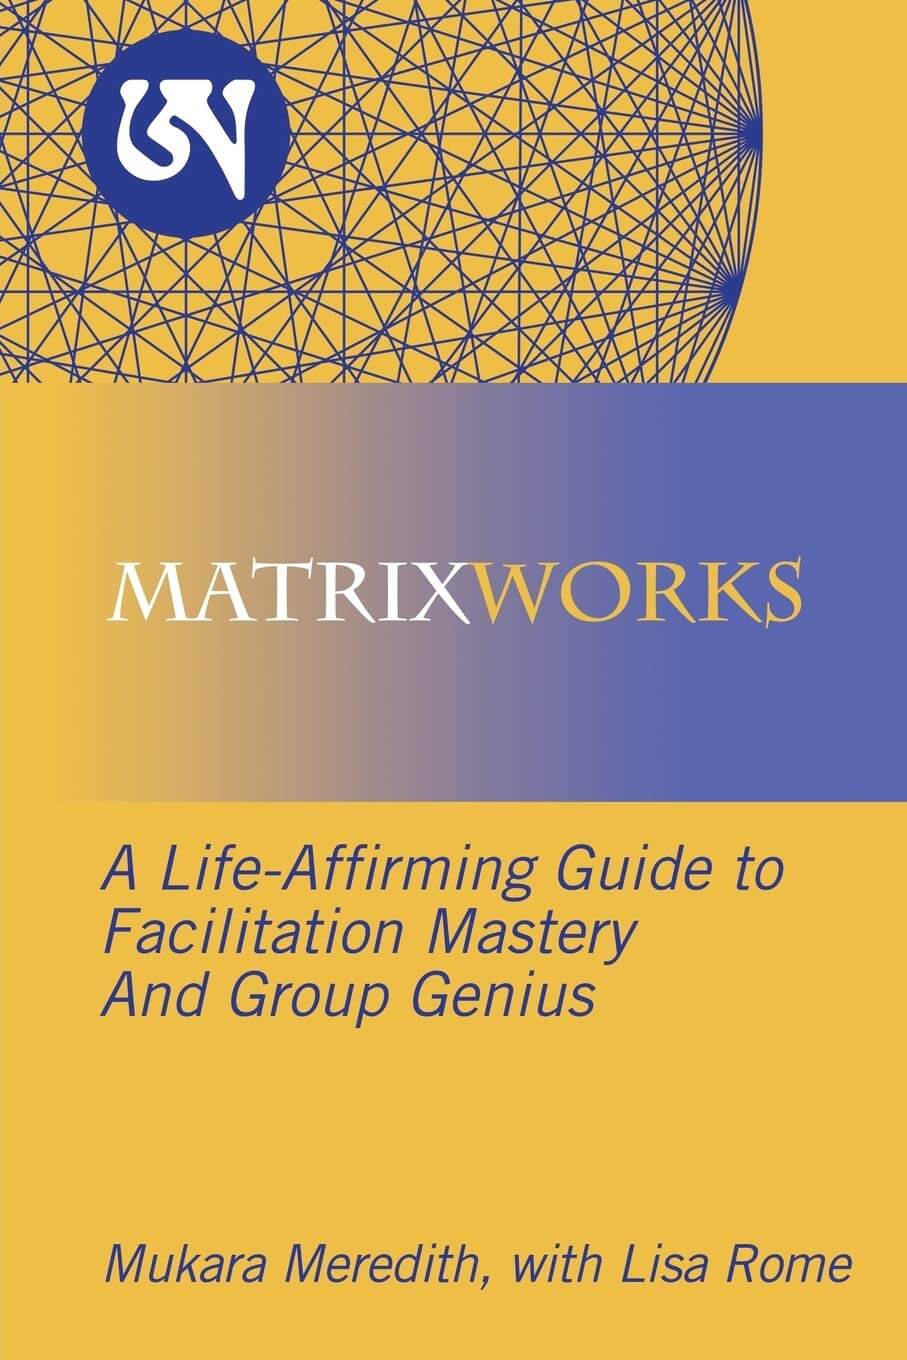 book cover: MATRIXWORKS: A Life-Affirming Guide to Facilitation Mastery and Group Genius